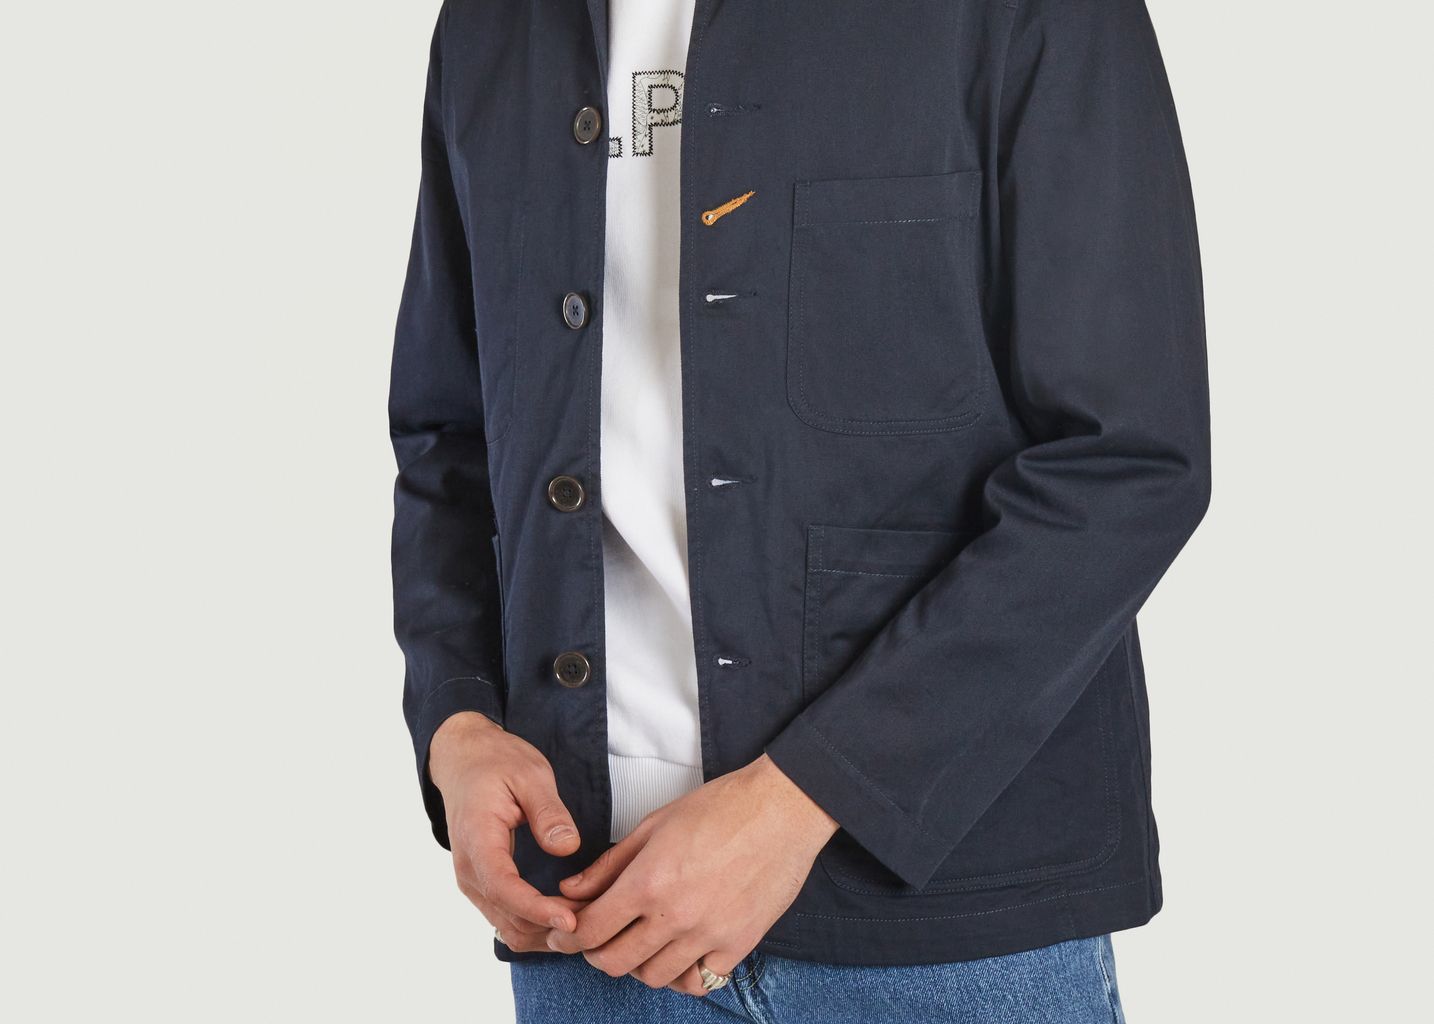 Bakers cotton jacket - Universal Works